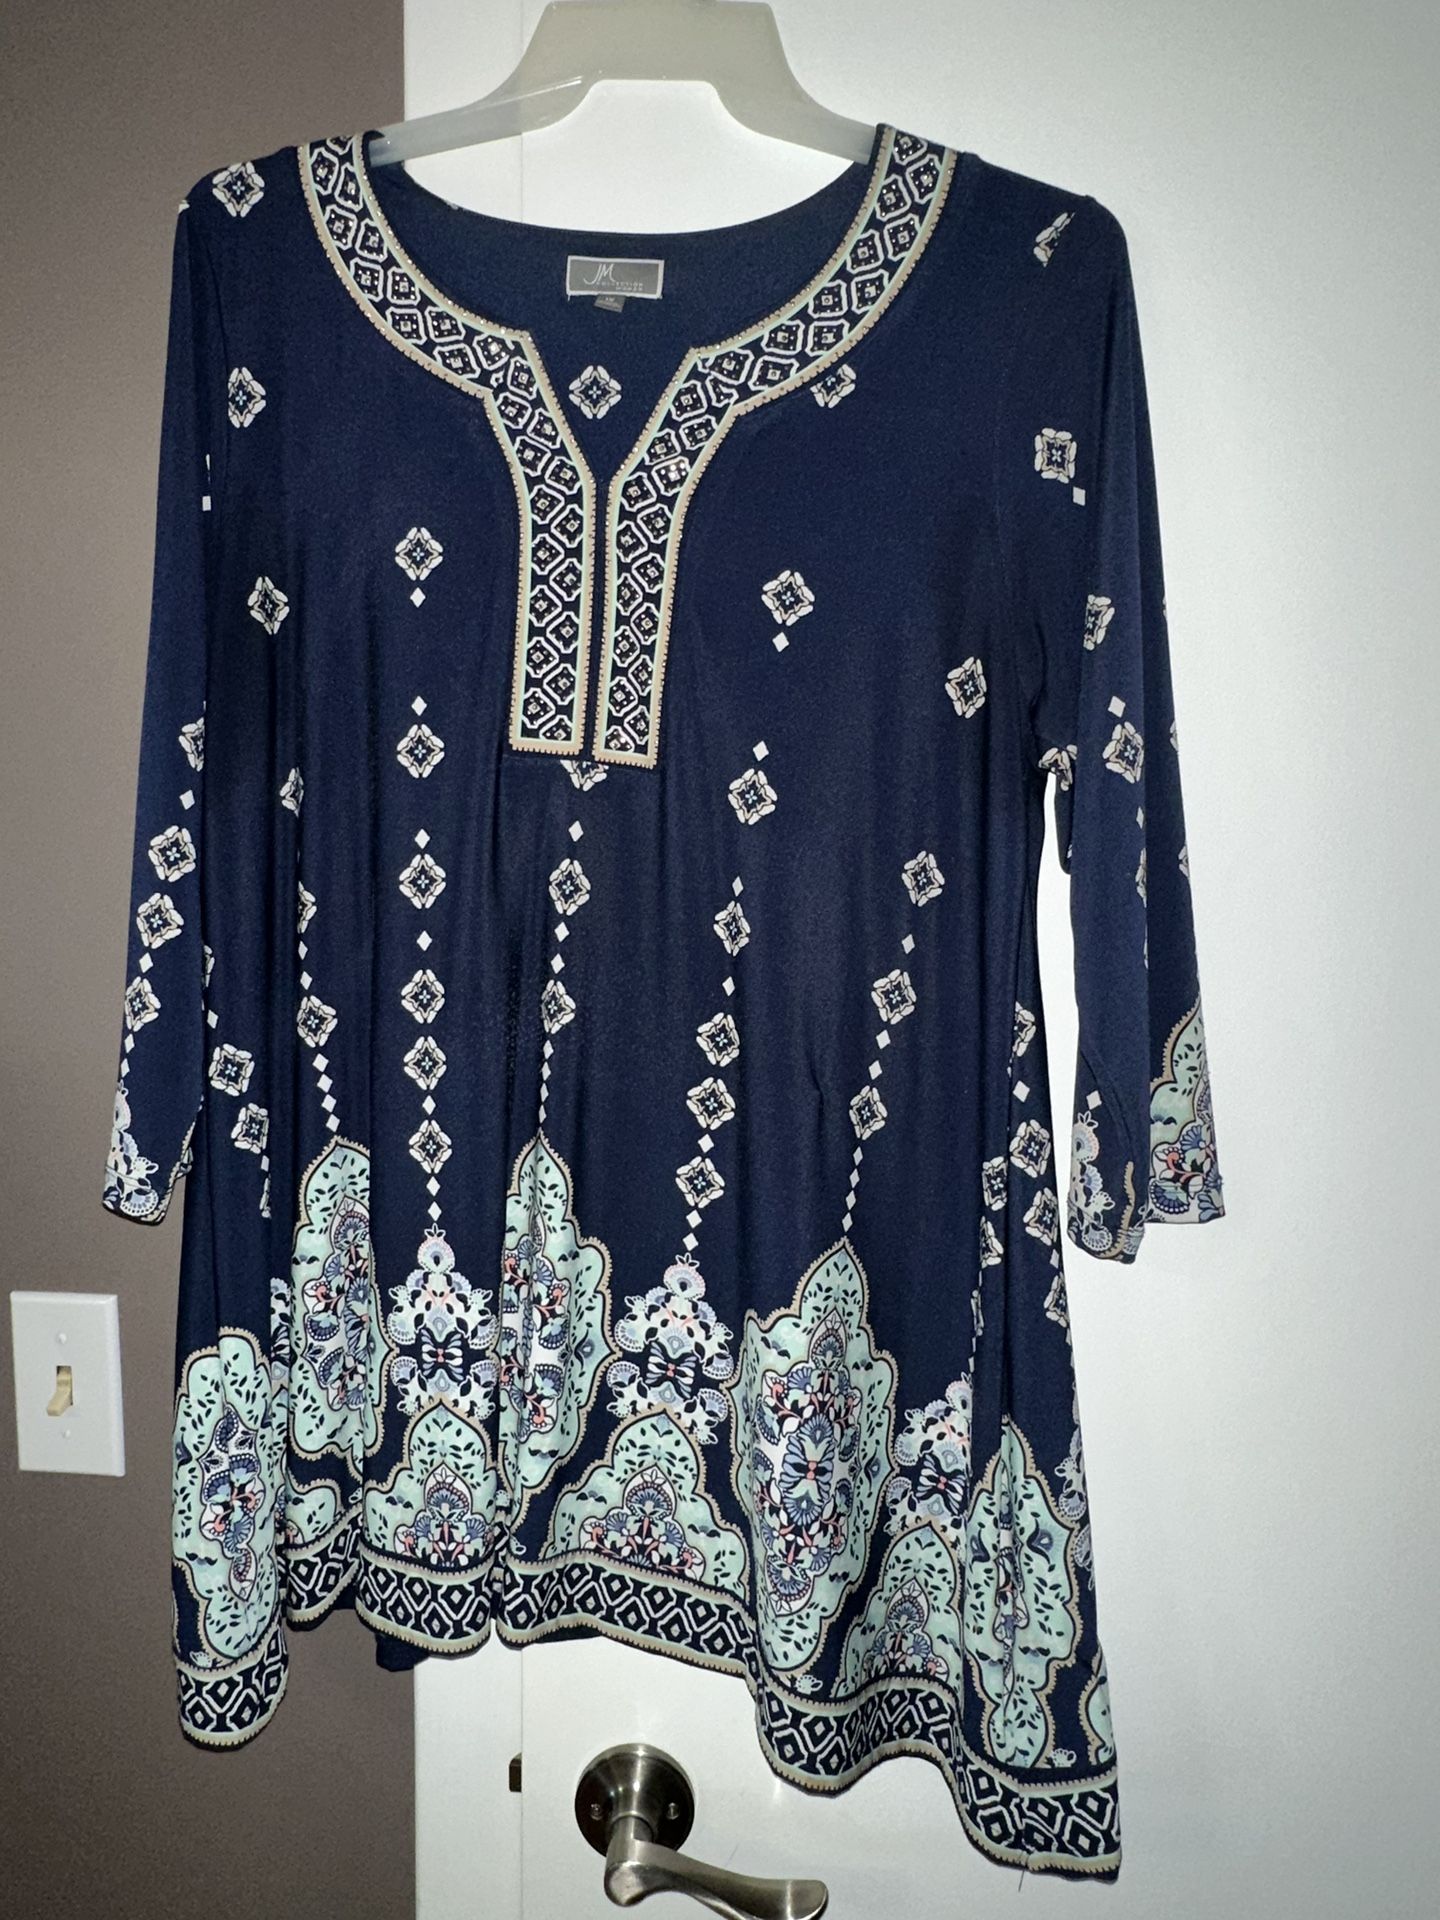 Beautiful Shirt - JM Collection (from Macy’s) - Color:  Navy blue w Gold and Light Blue Trim - Size 1X 